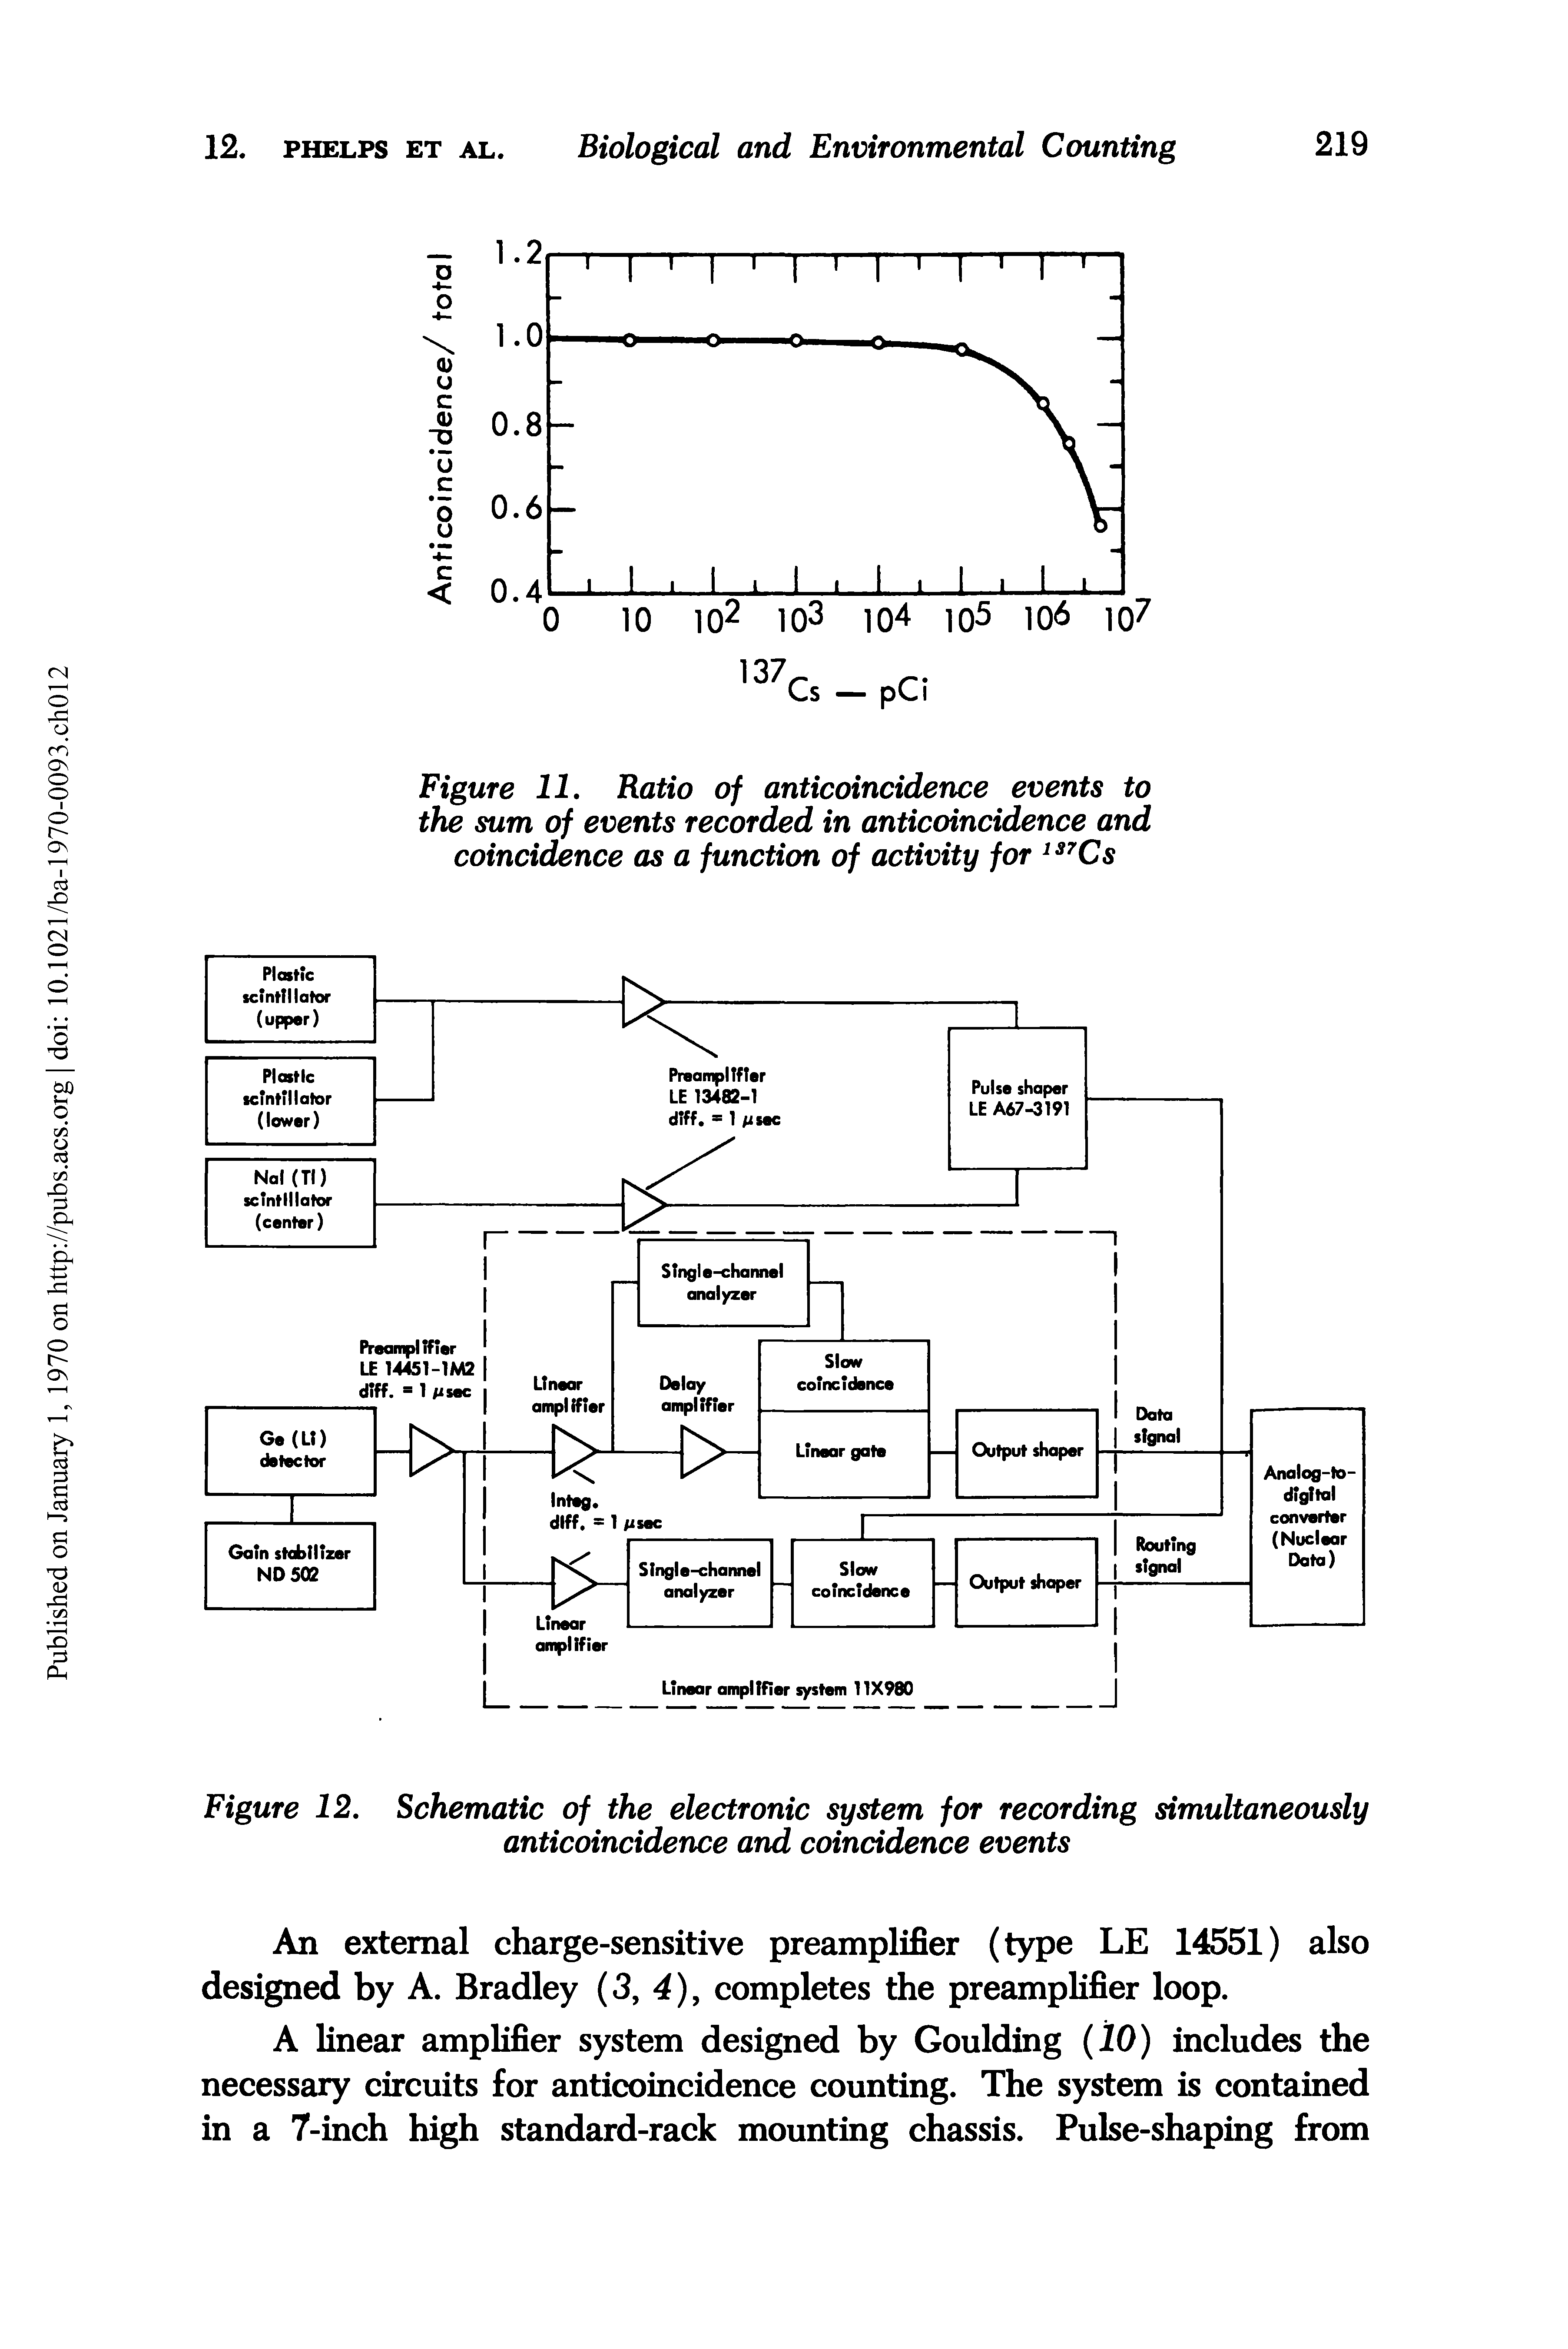 Figure 12. Schematic of the electronic system for recording simultaneously anticoincidence and coincidence events...